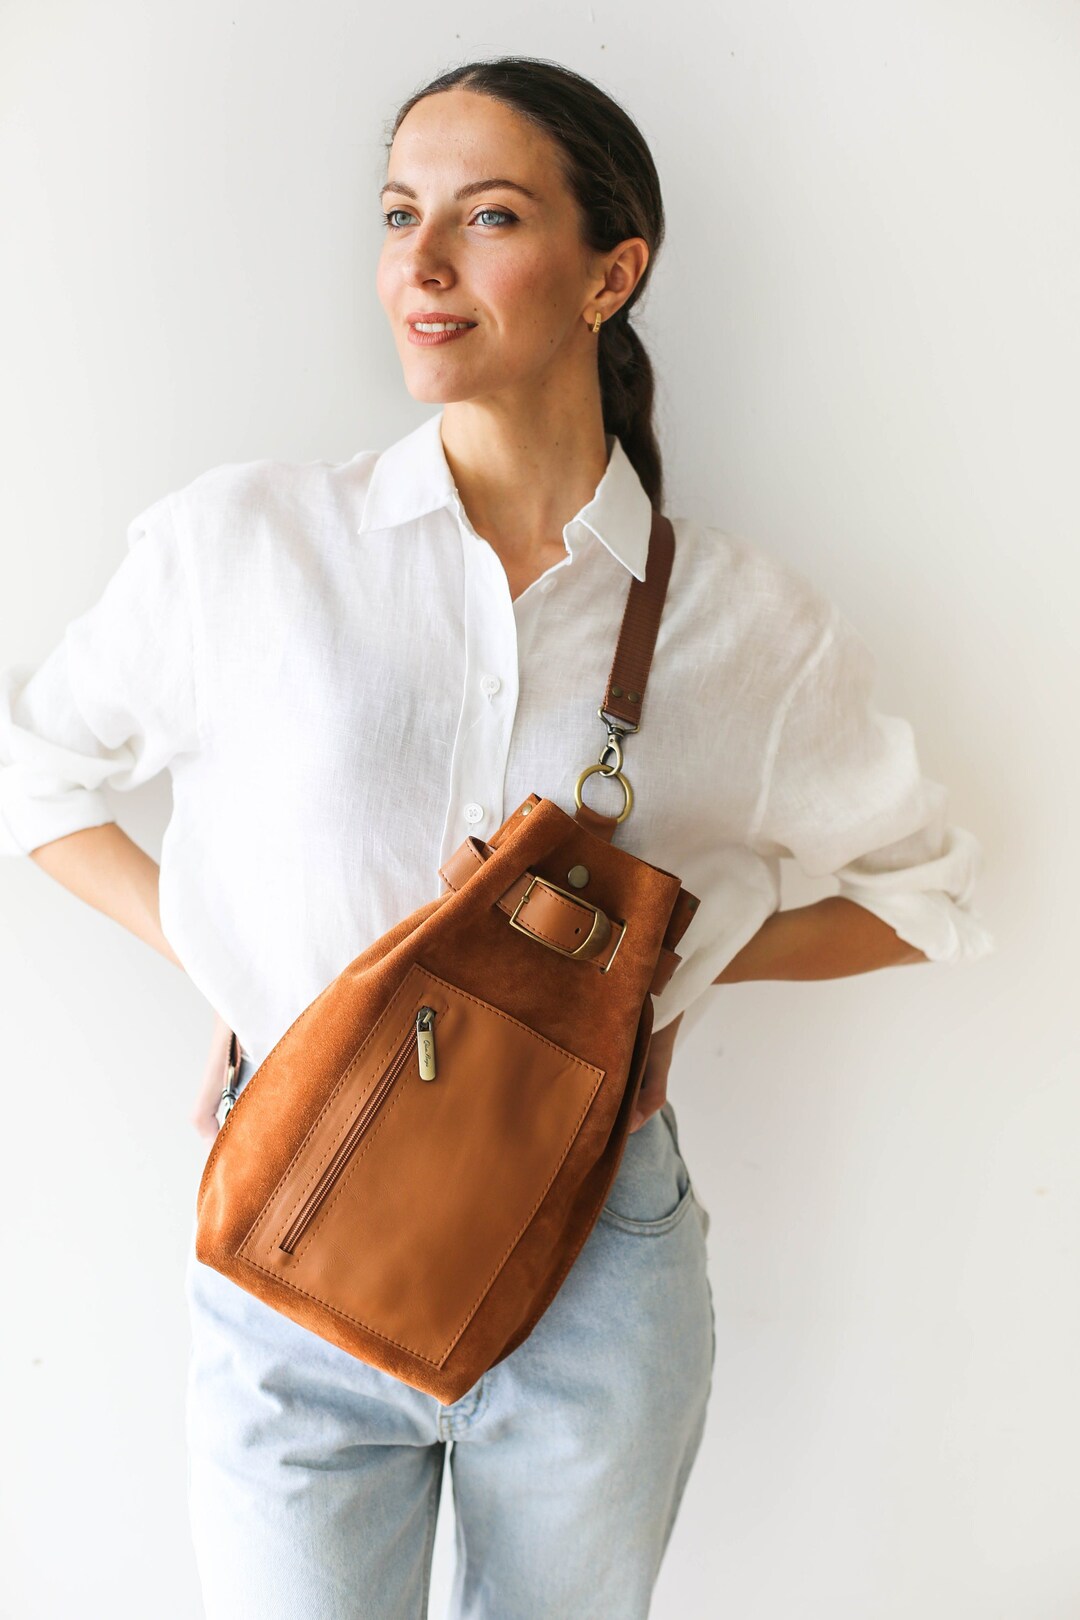 Leather Sling Bag, Brown Suede Bag, Leather Bag, Leather Cross Body ...